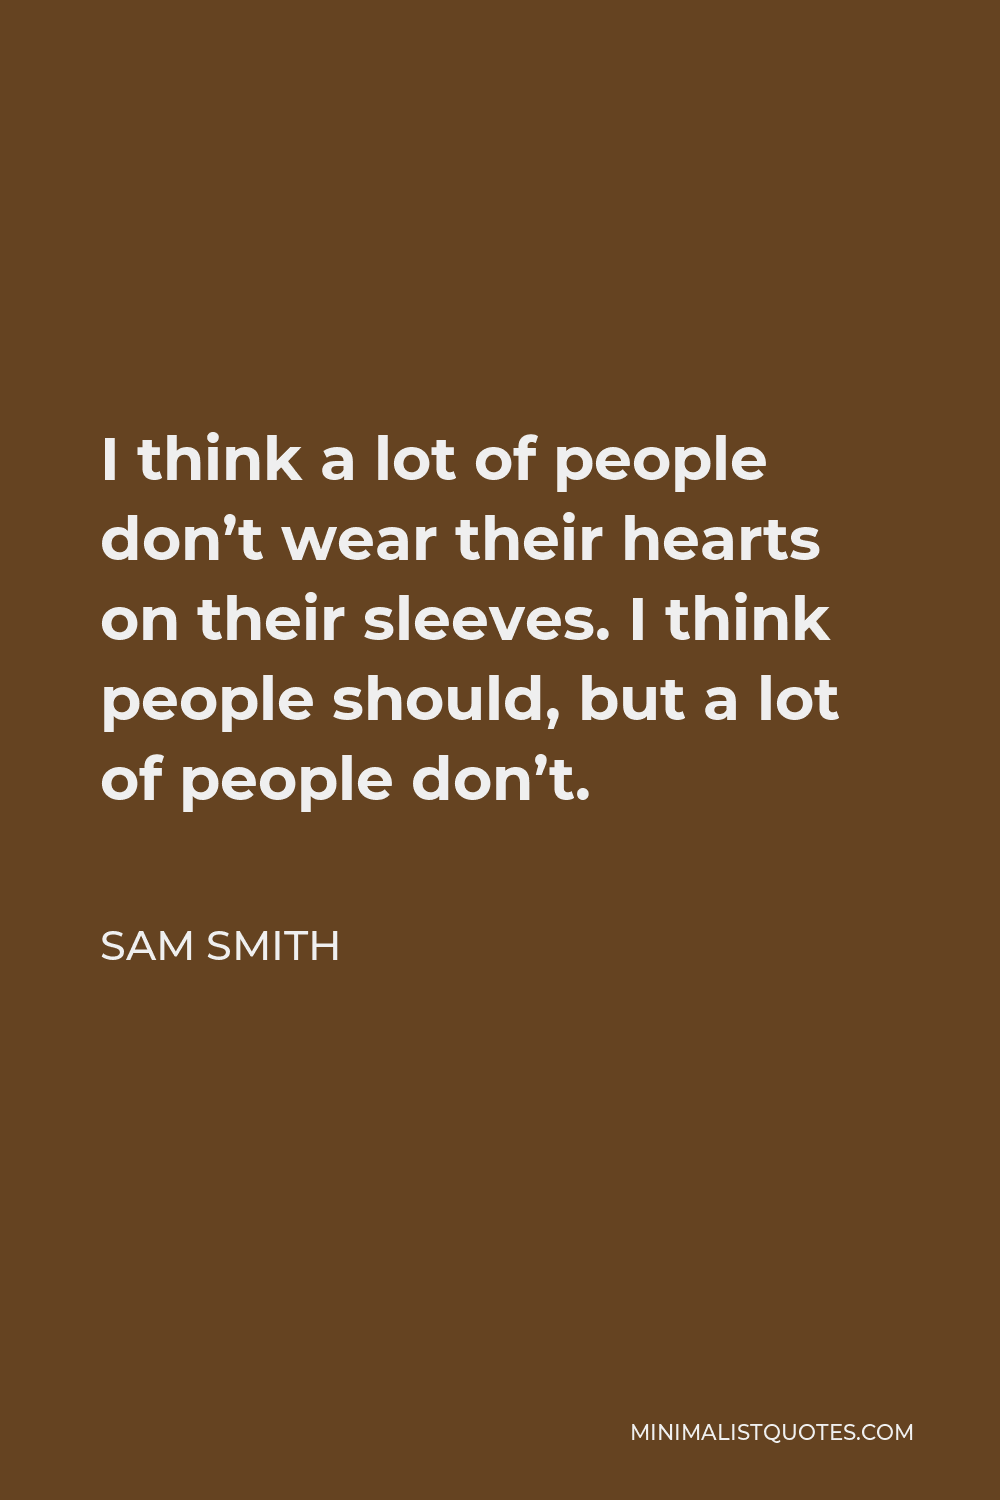 Sam Smith Quote - I think a lot of people don’t wear their hearts on their sleeves. I think people should, but a lot of people don’t.